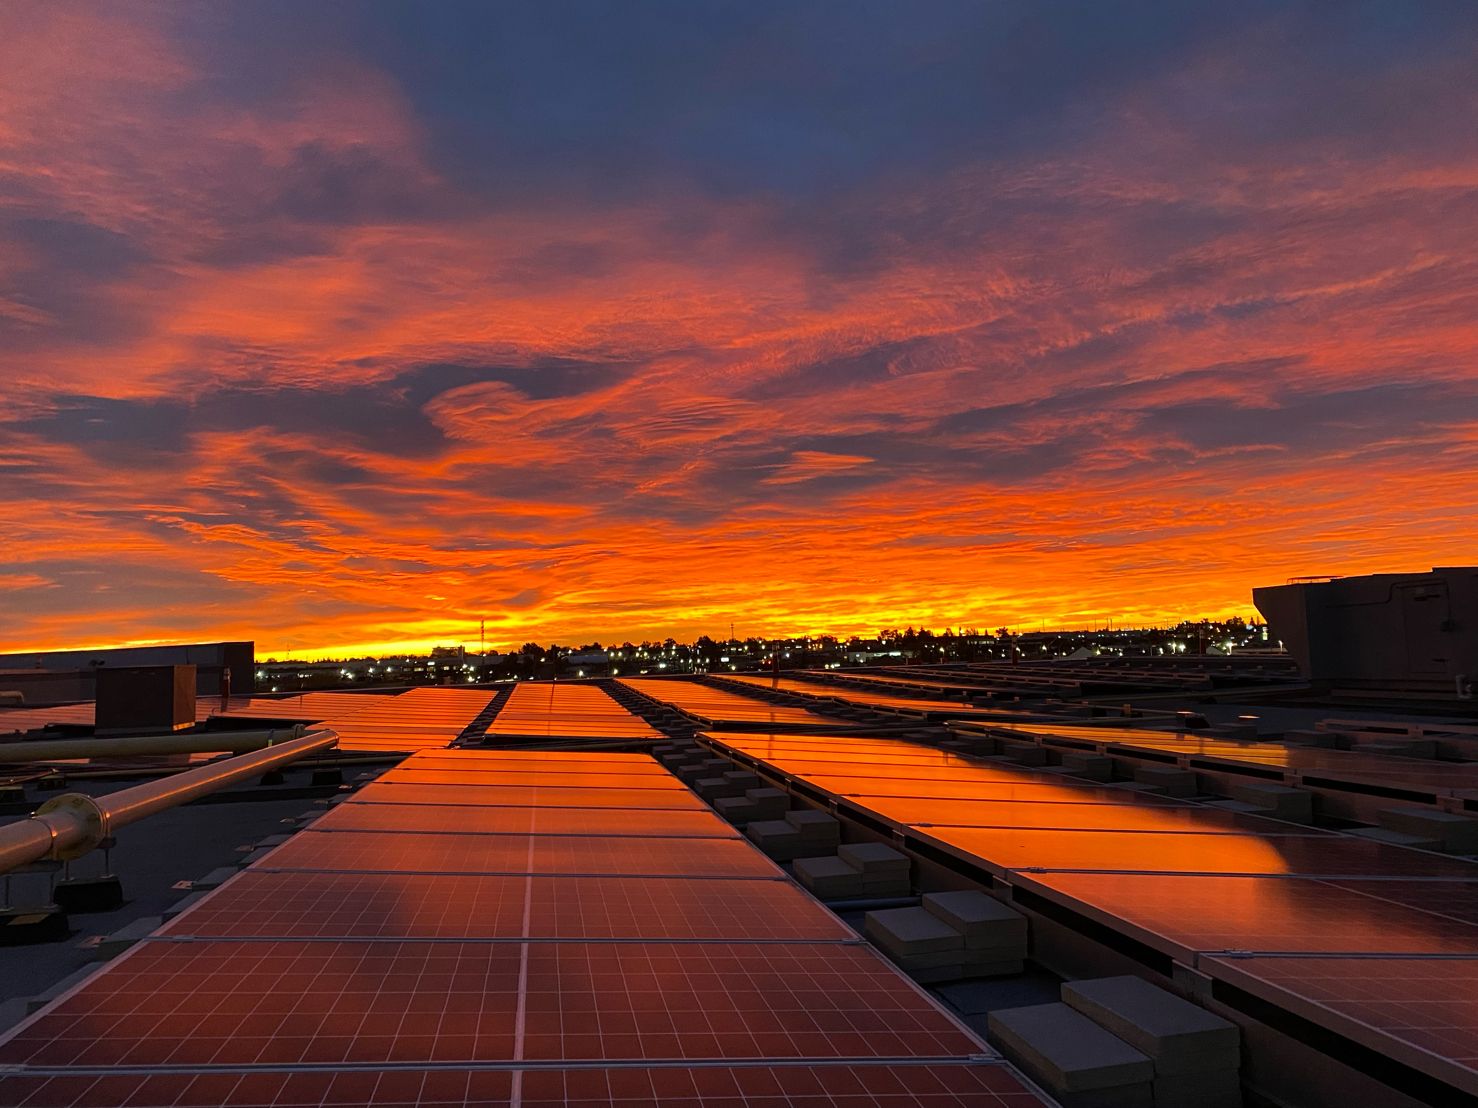 Photovoltaic Solar Array installed at the Chinook Centre. Photo courtesy of Cadillac Fairview